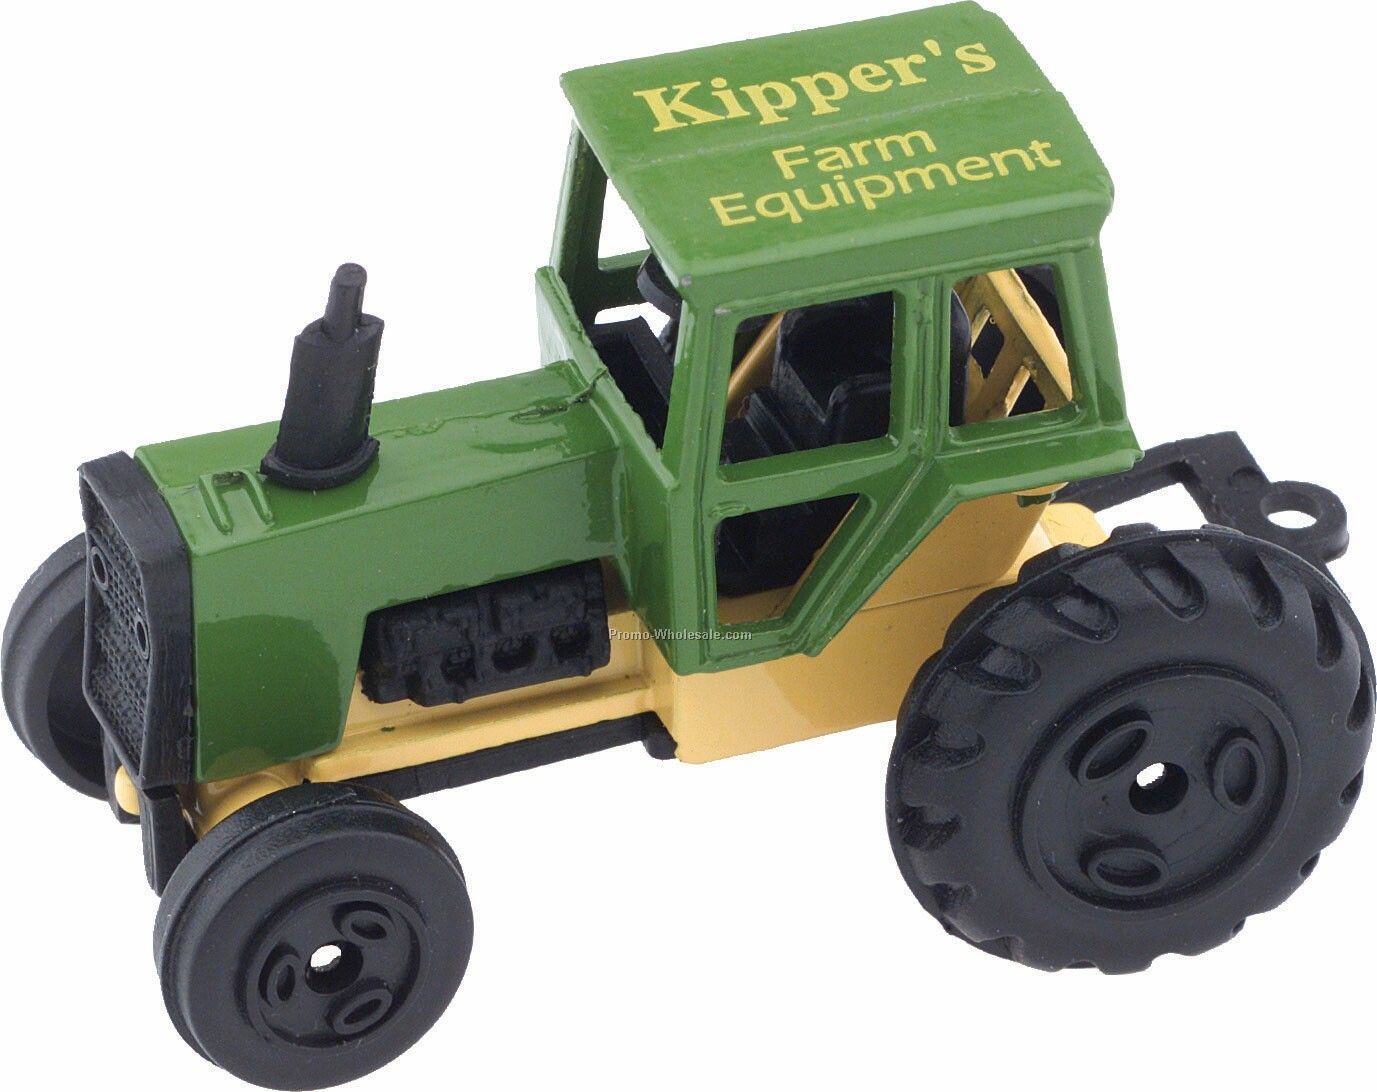 2-1/2" Green Tractor Die Cast Mini Vehicles - 3 Day